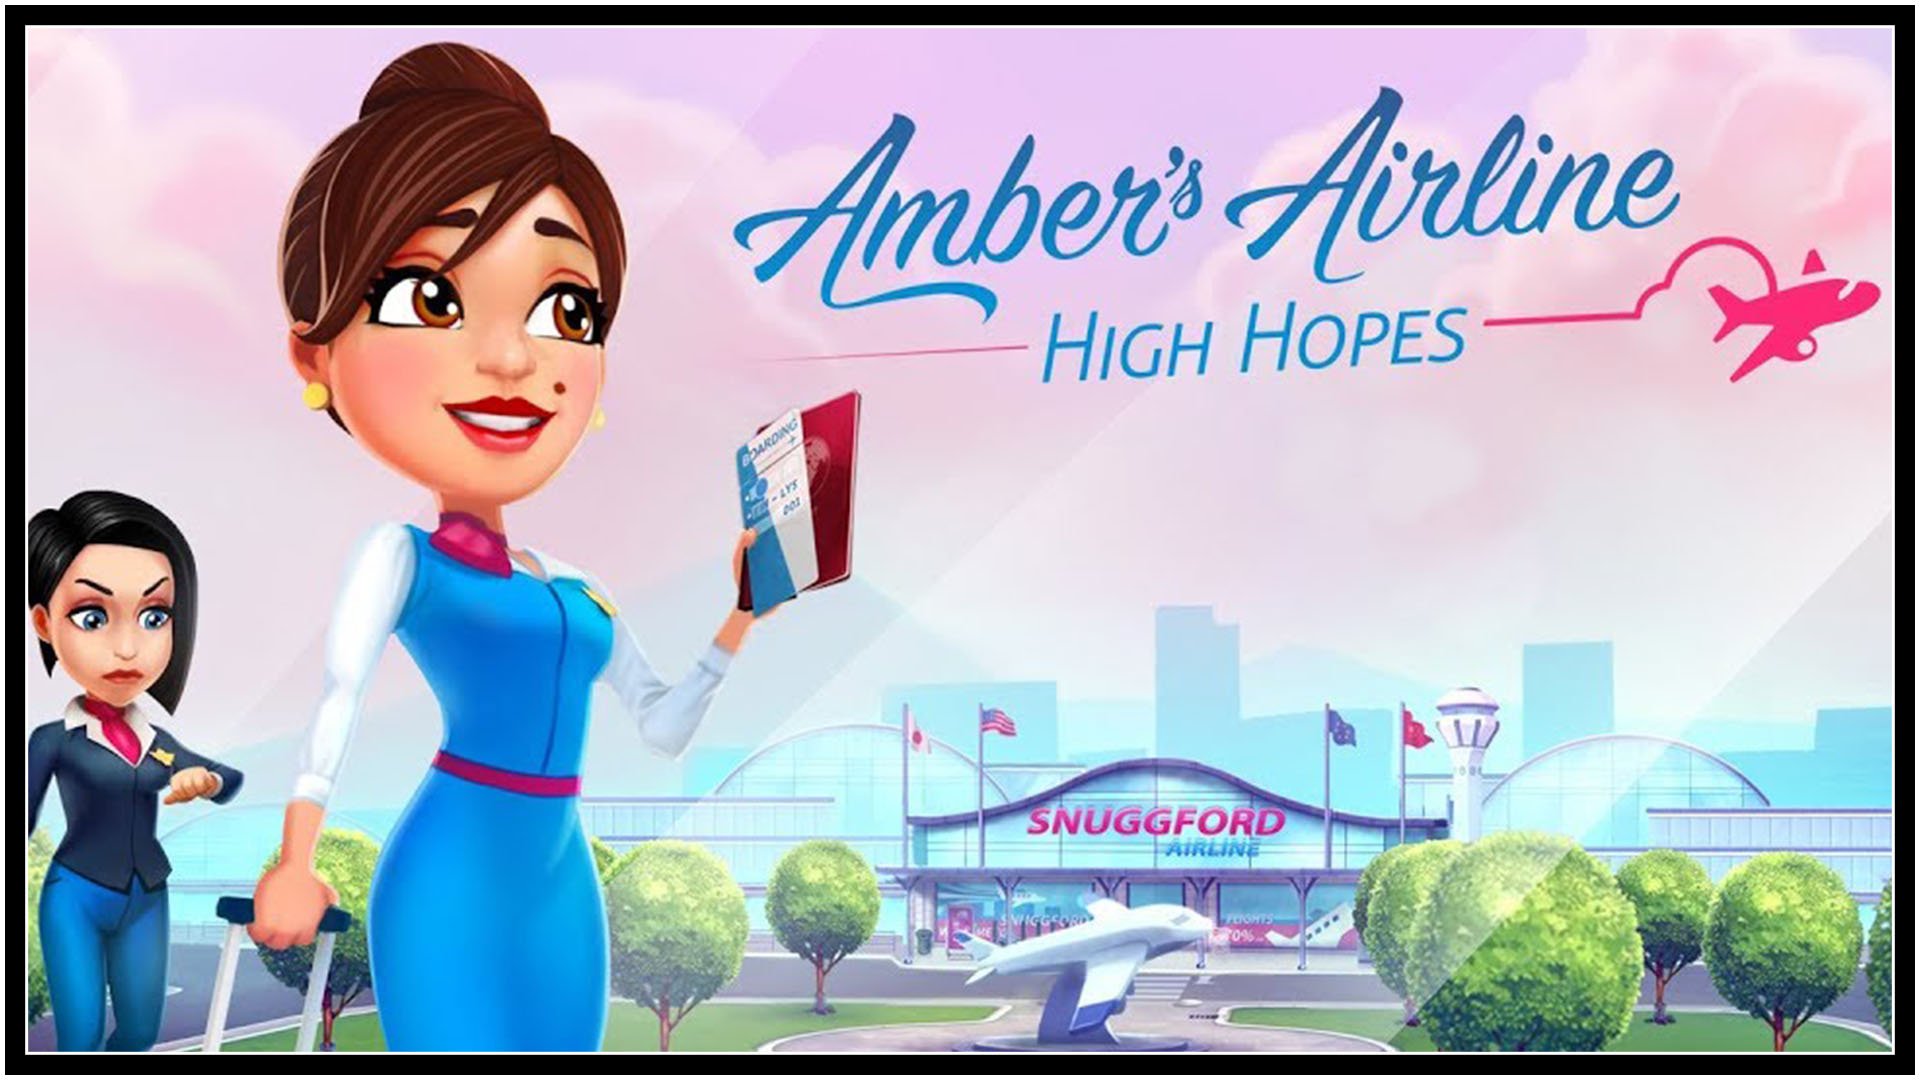 Amber's Airline High Hopes Fi3